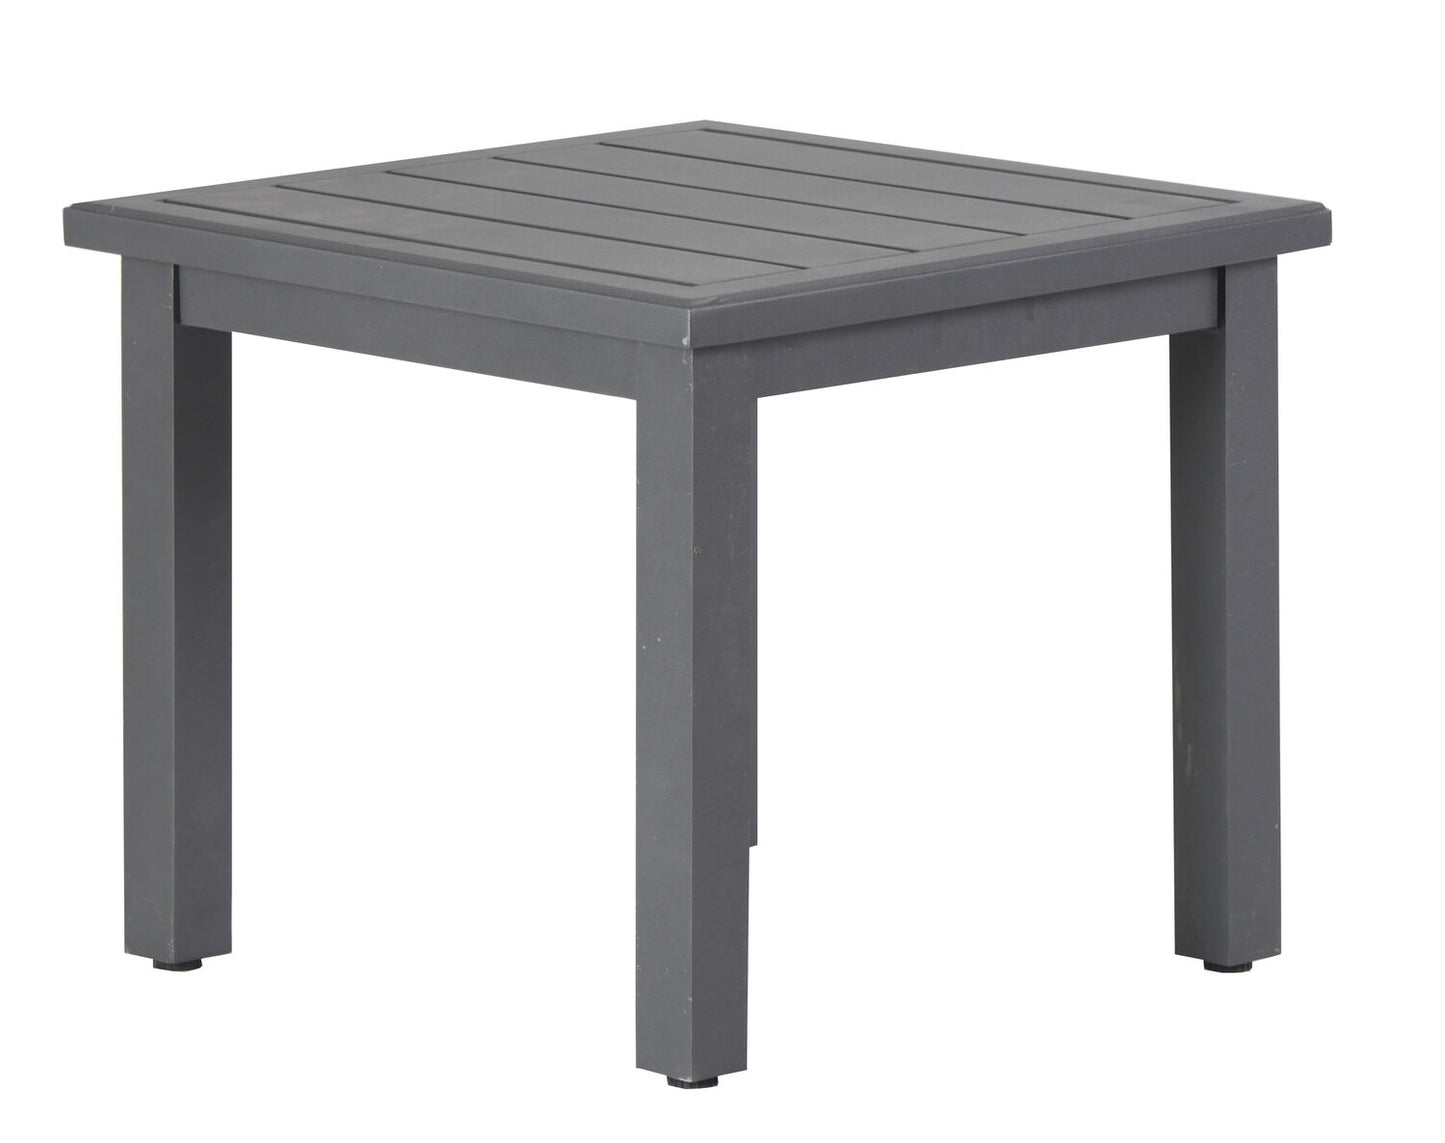 Patio Renaissance Pacifica 44" Square Patio Dining Table | Jacobs Custom Living